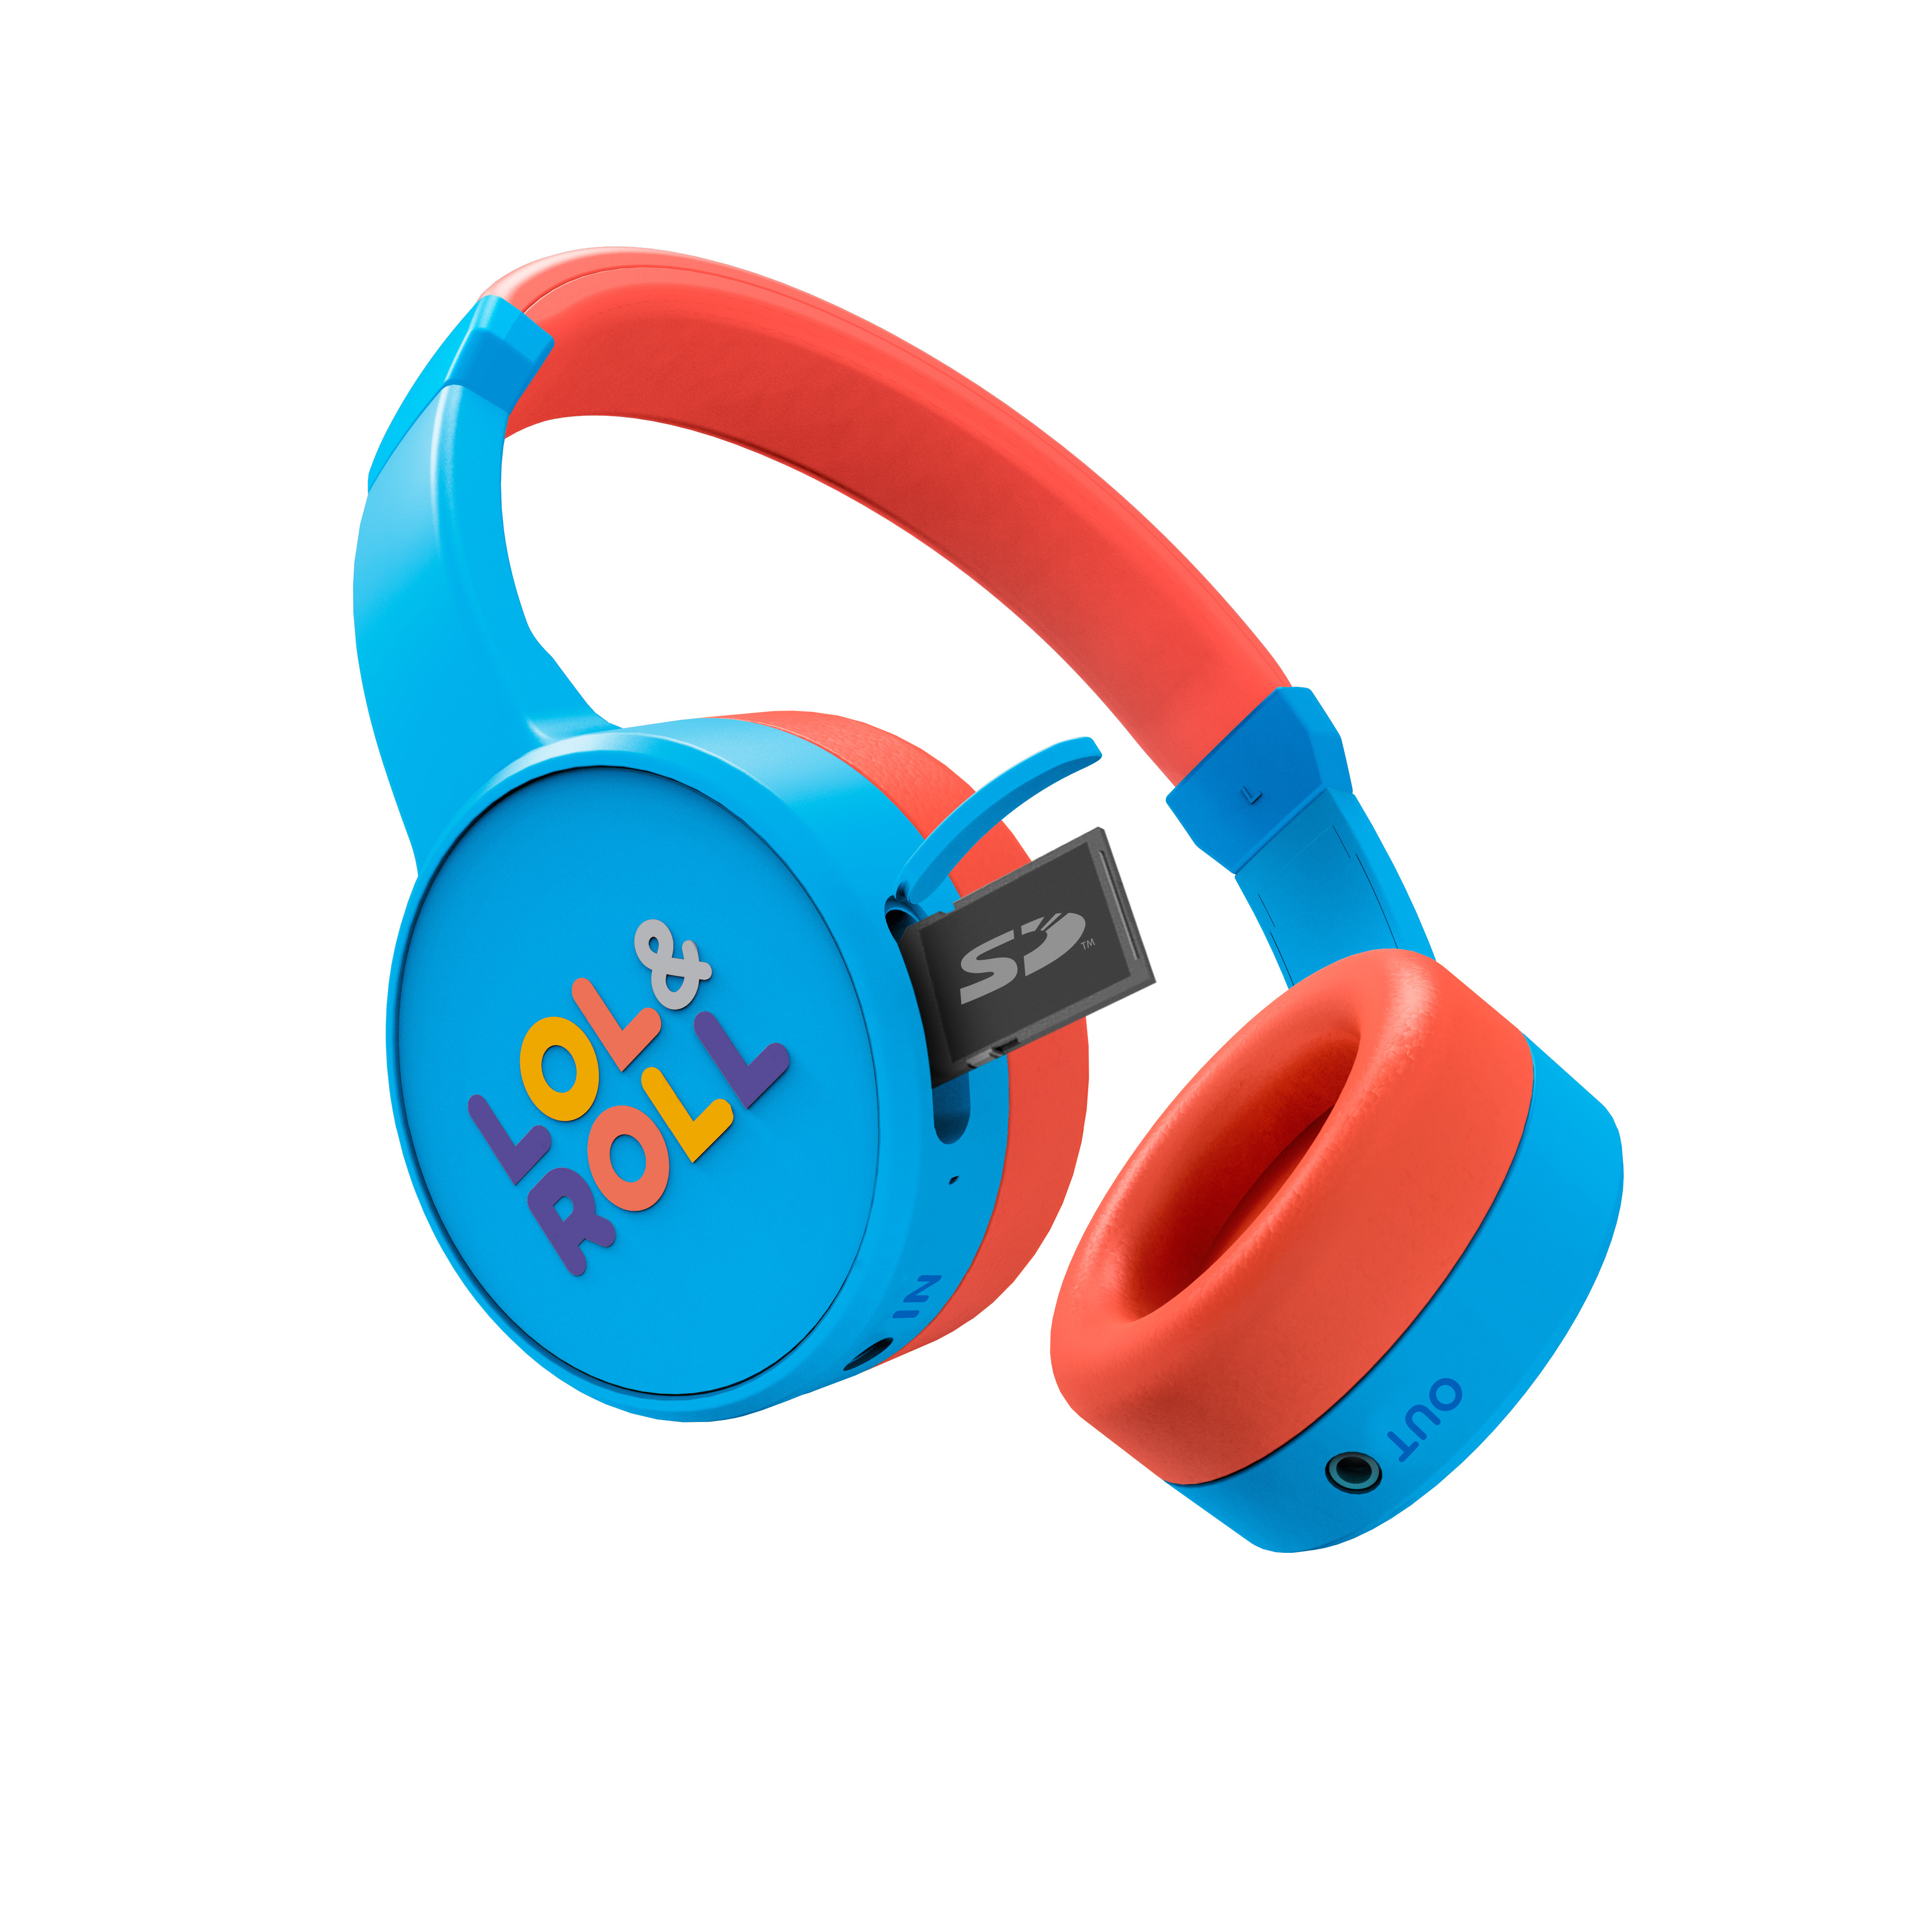 Bluetooth headset for kids to connect them to any smartphone